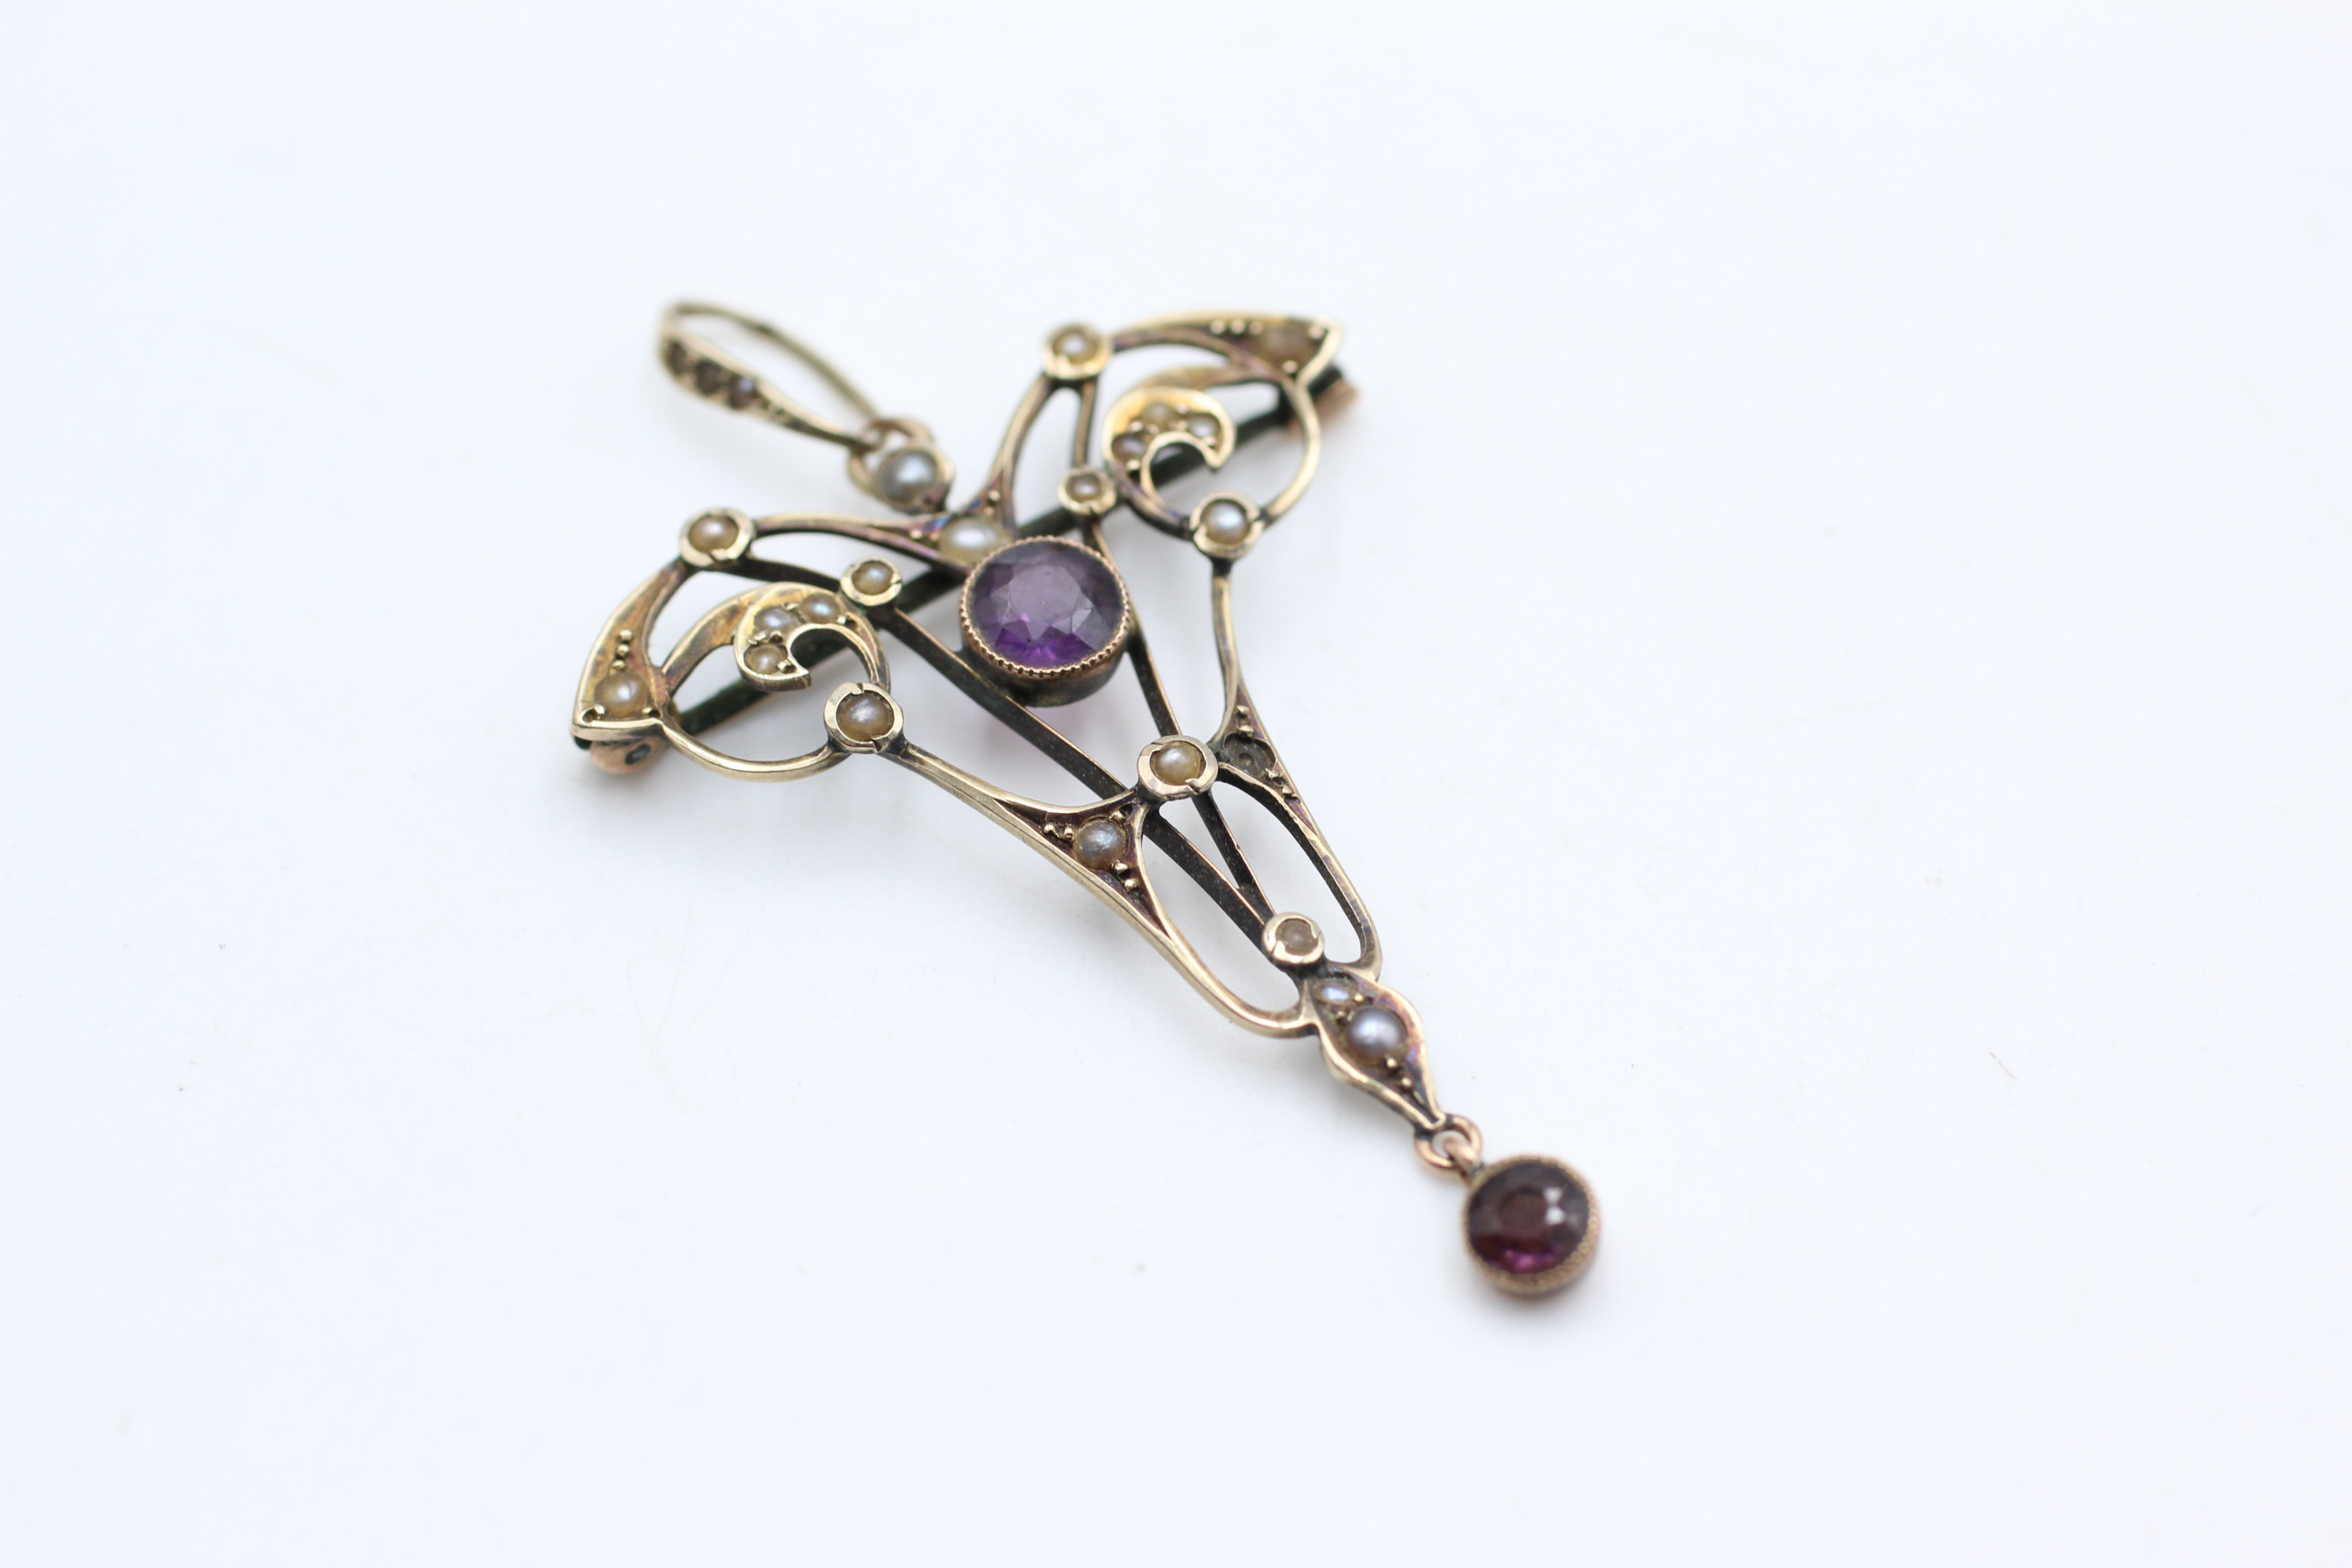 9ct gold antique amethyst & seed pearl lavalier pendant - as seen (3.4g)